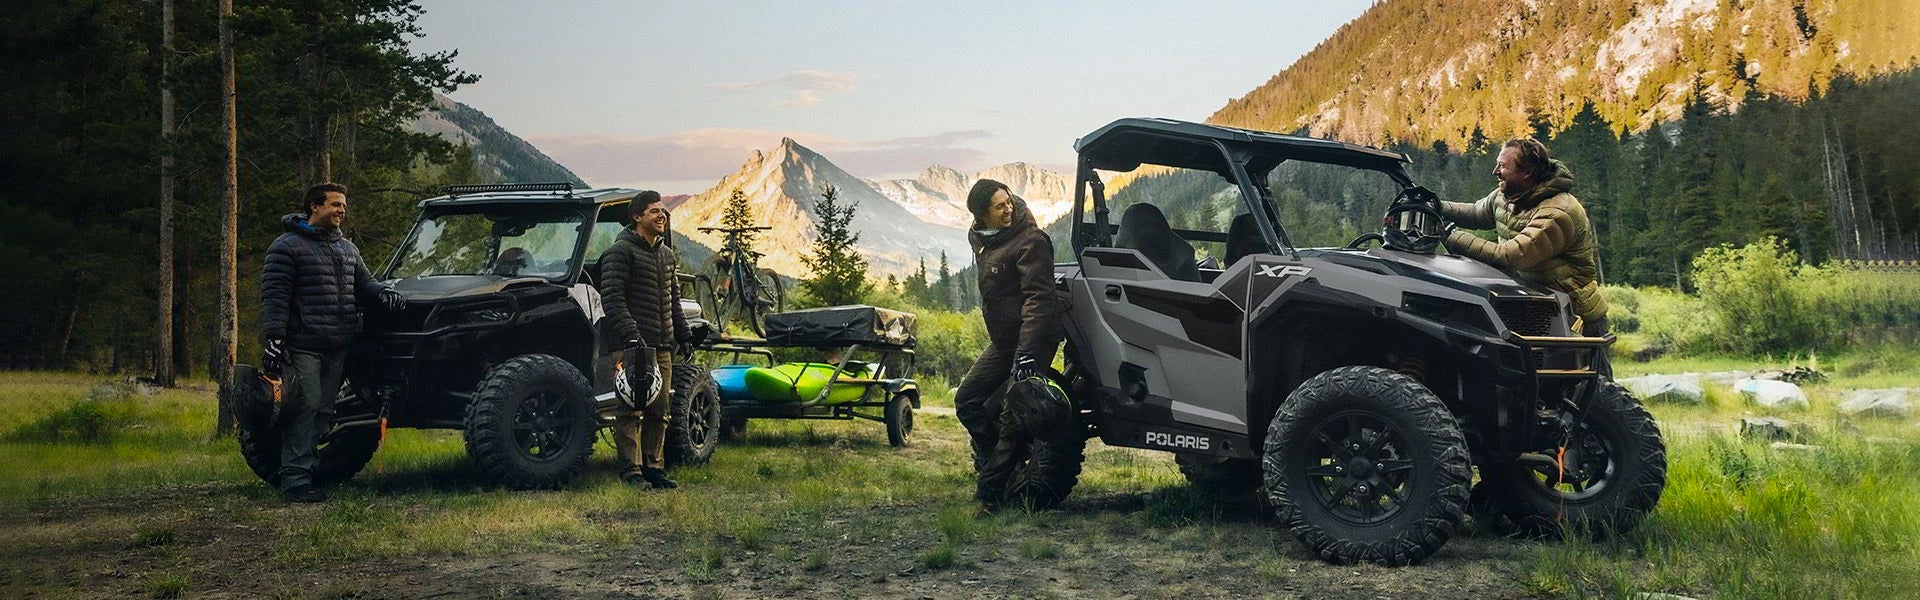 Shop new Polaris side by sides at Karl Malone Powersports